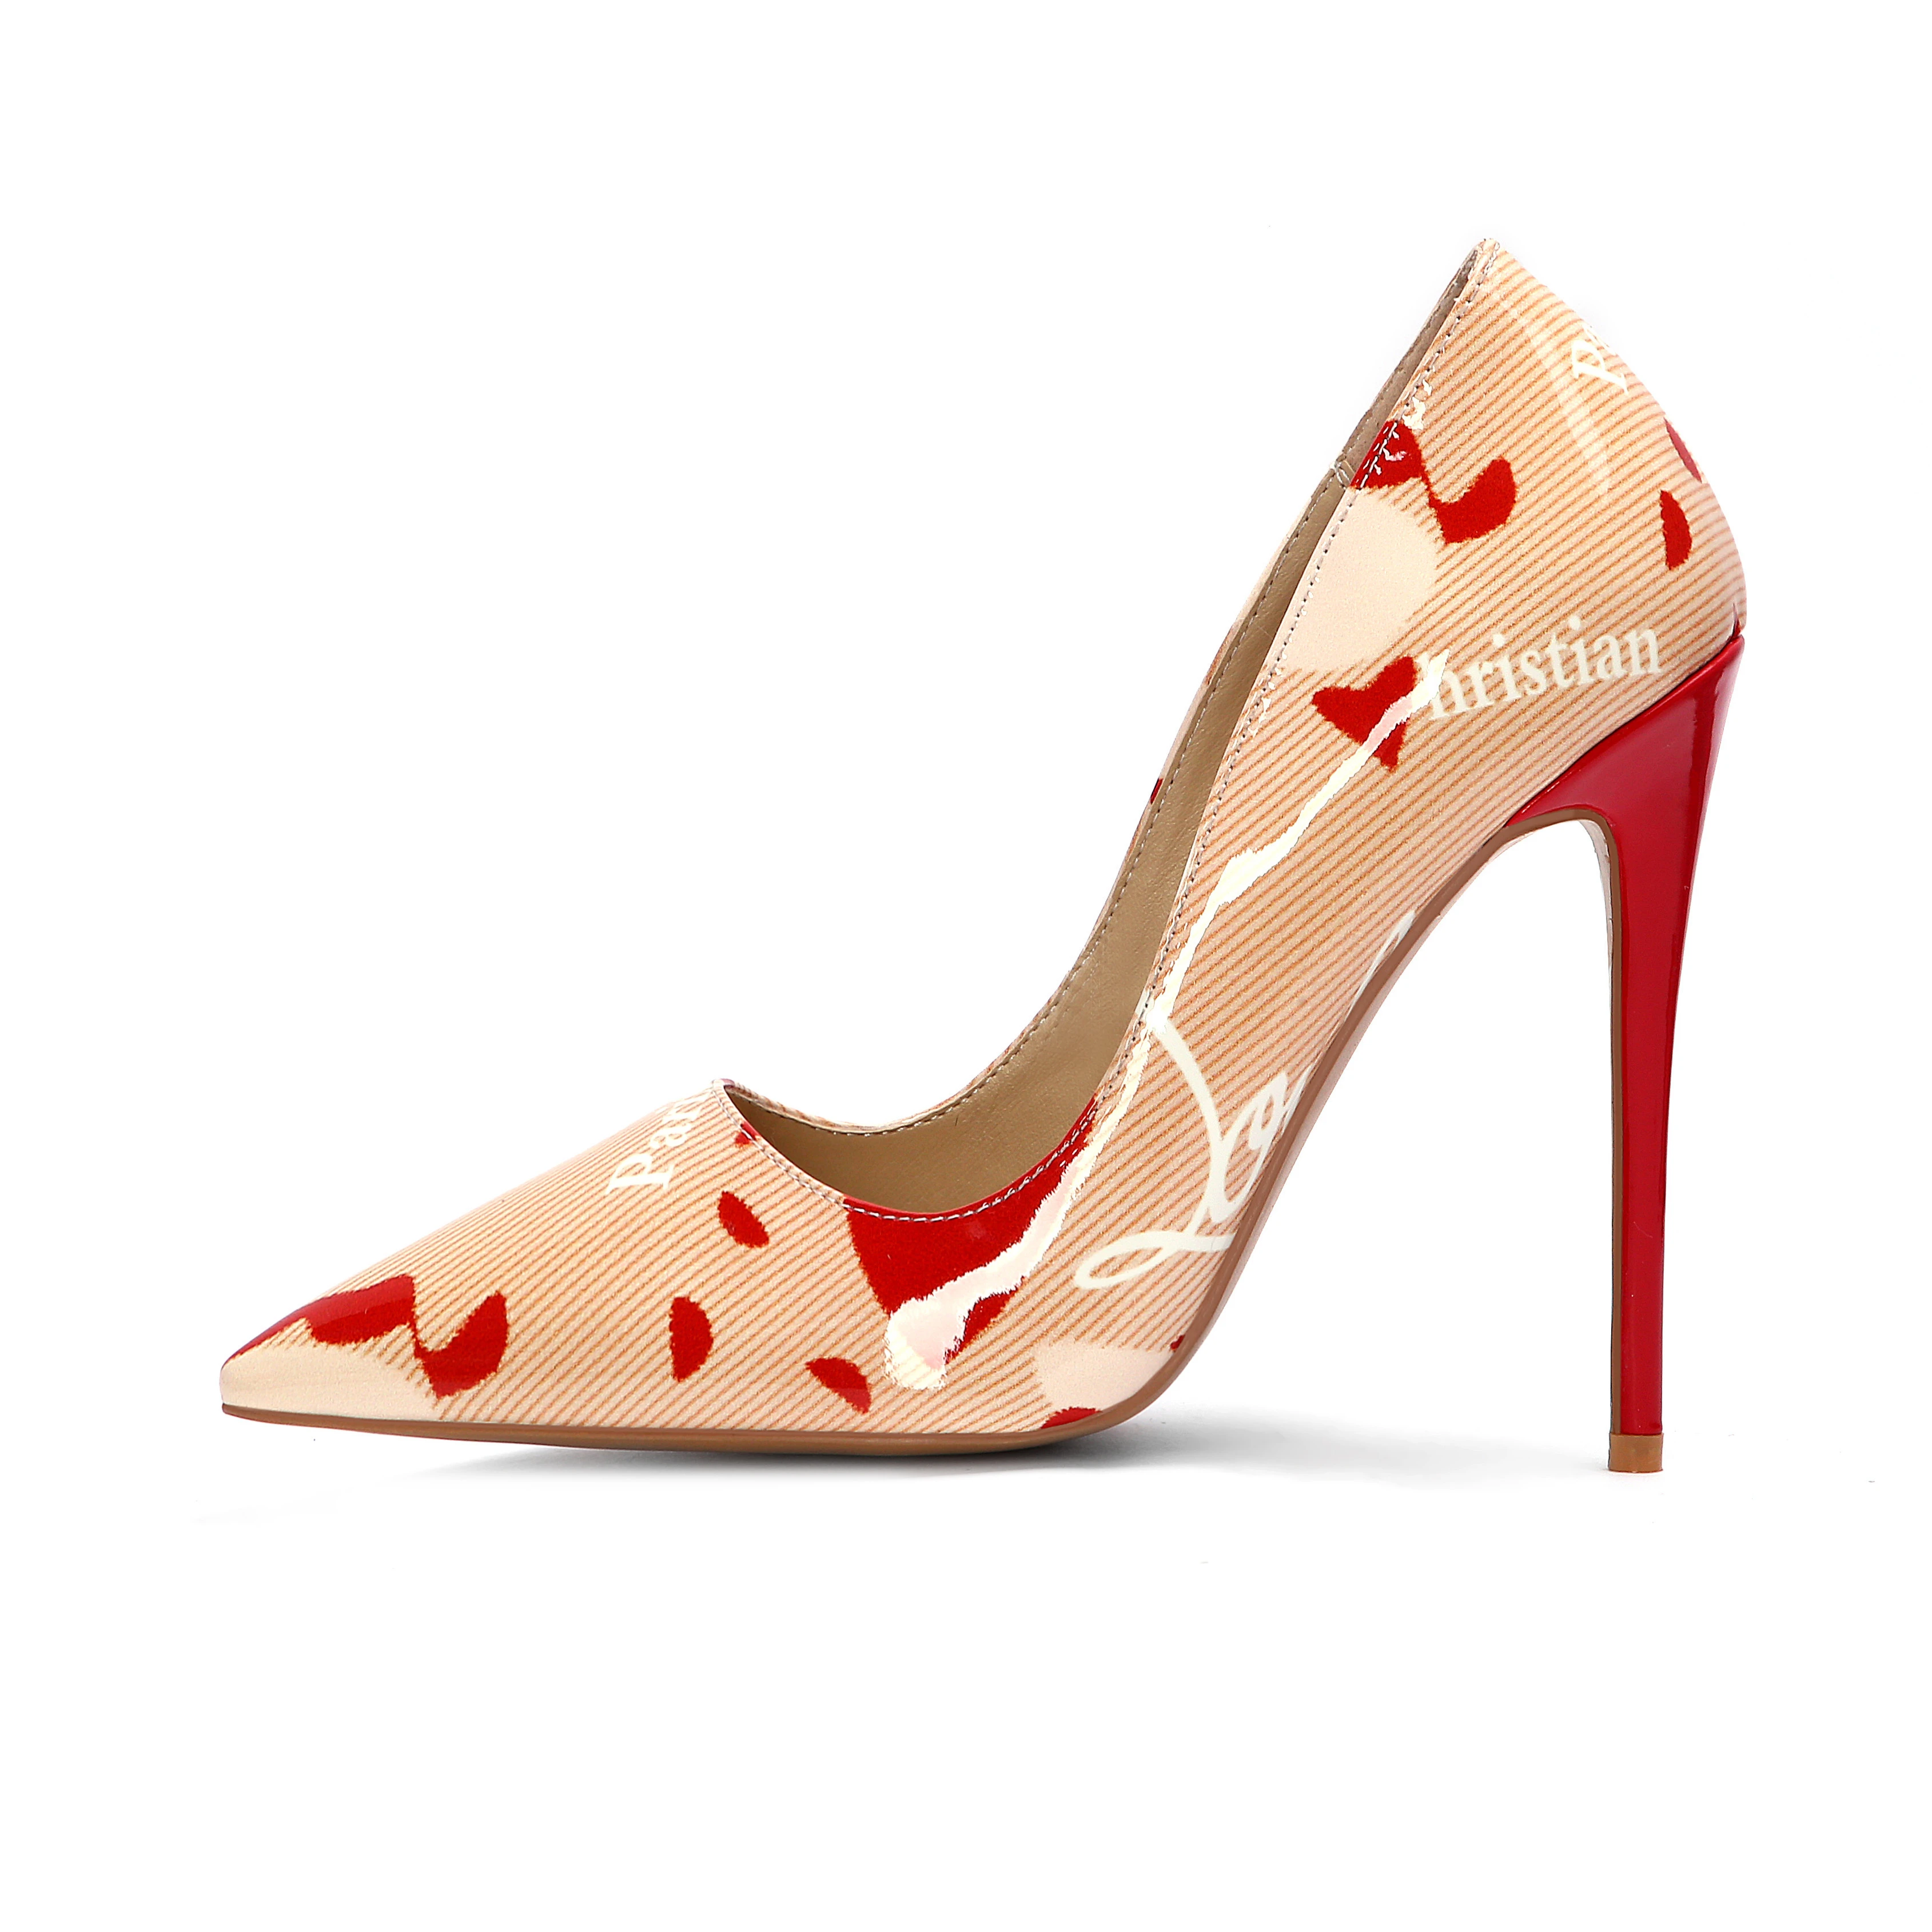 2019 Large Size Extreme High Heels Patent Pu Leather Hand-printed Material Women Dress Shoes